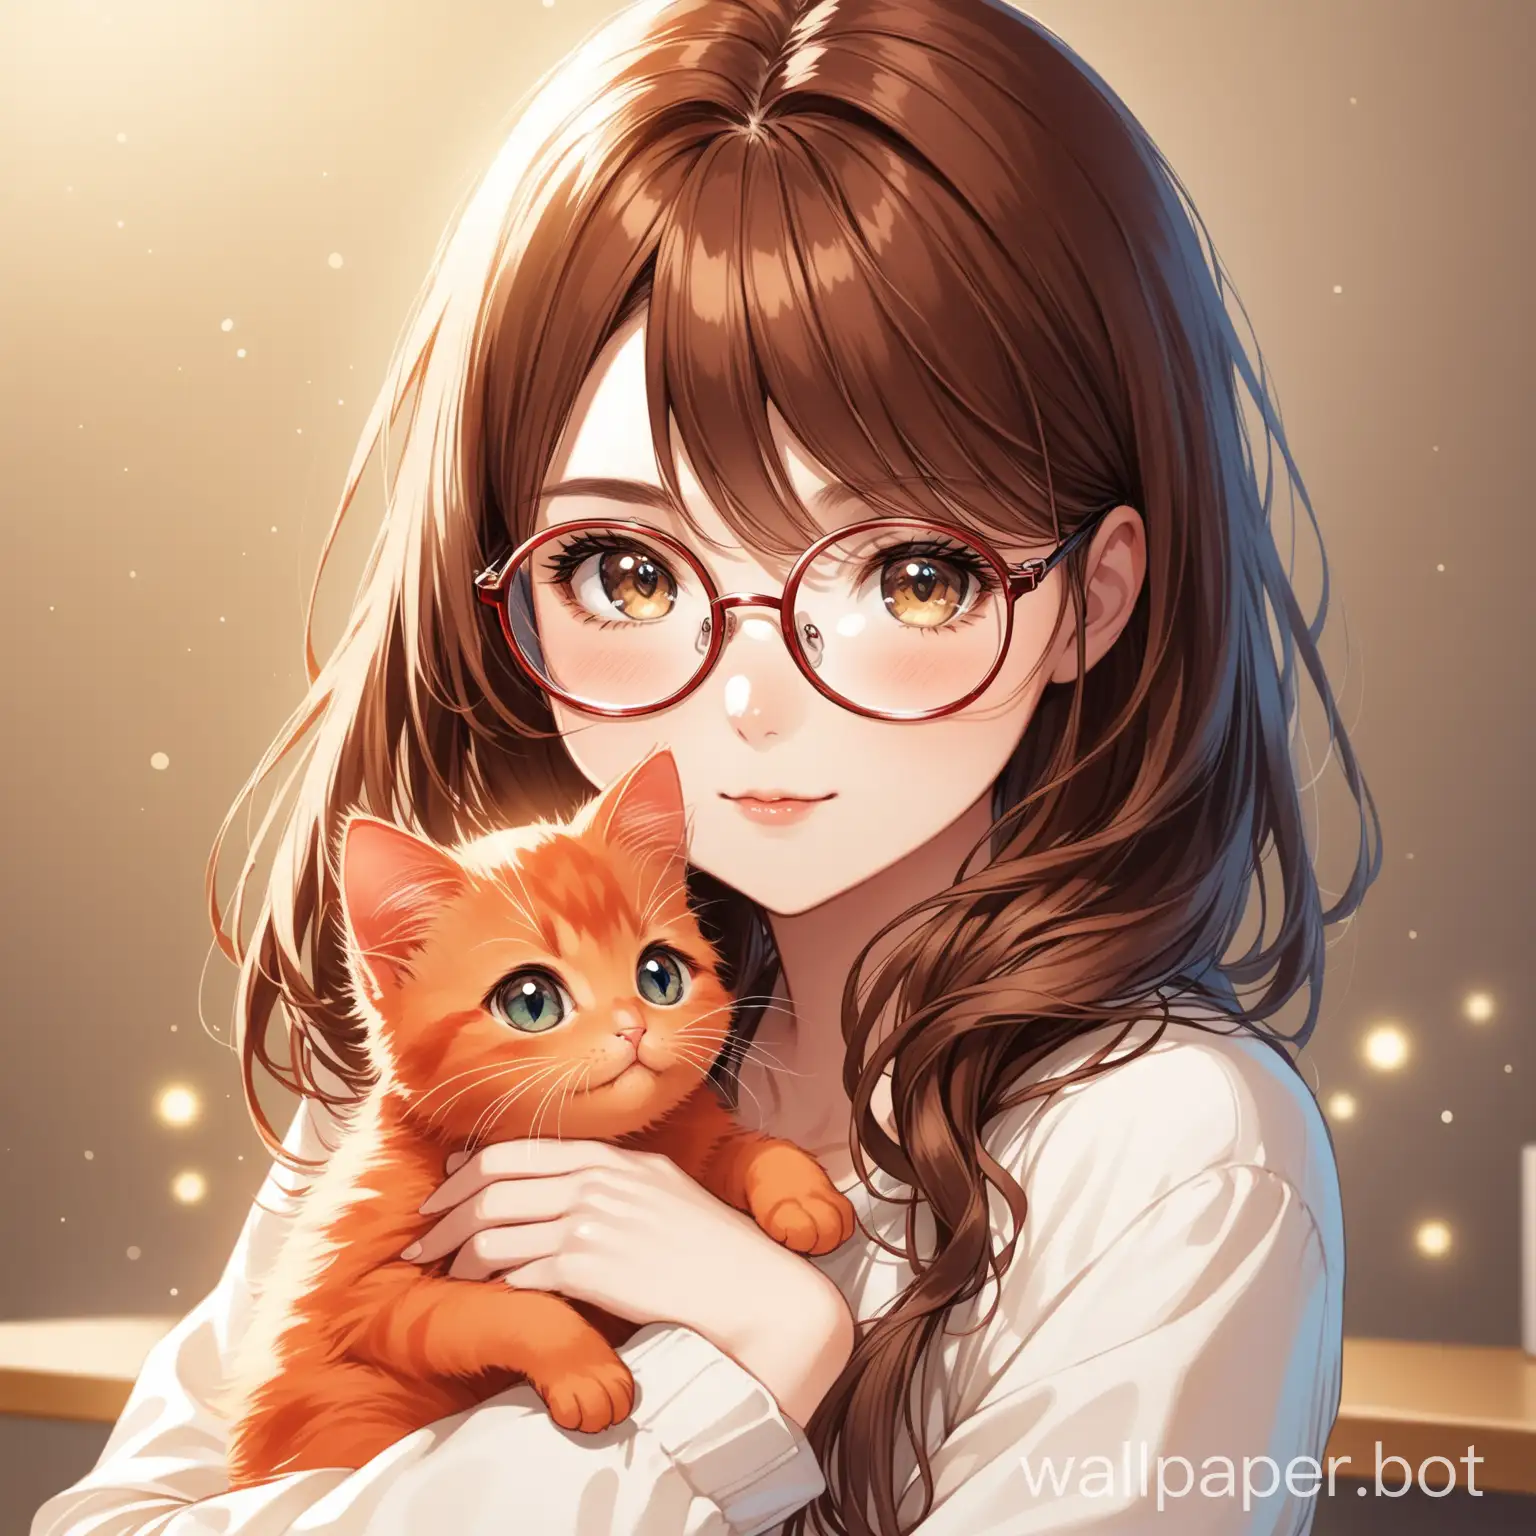 a girl with brown hair and glasses and a red kitten